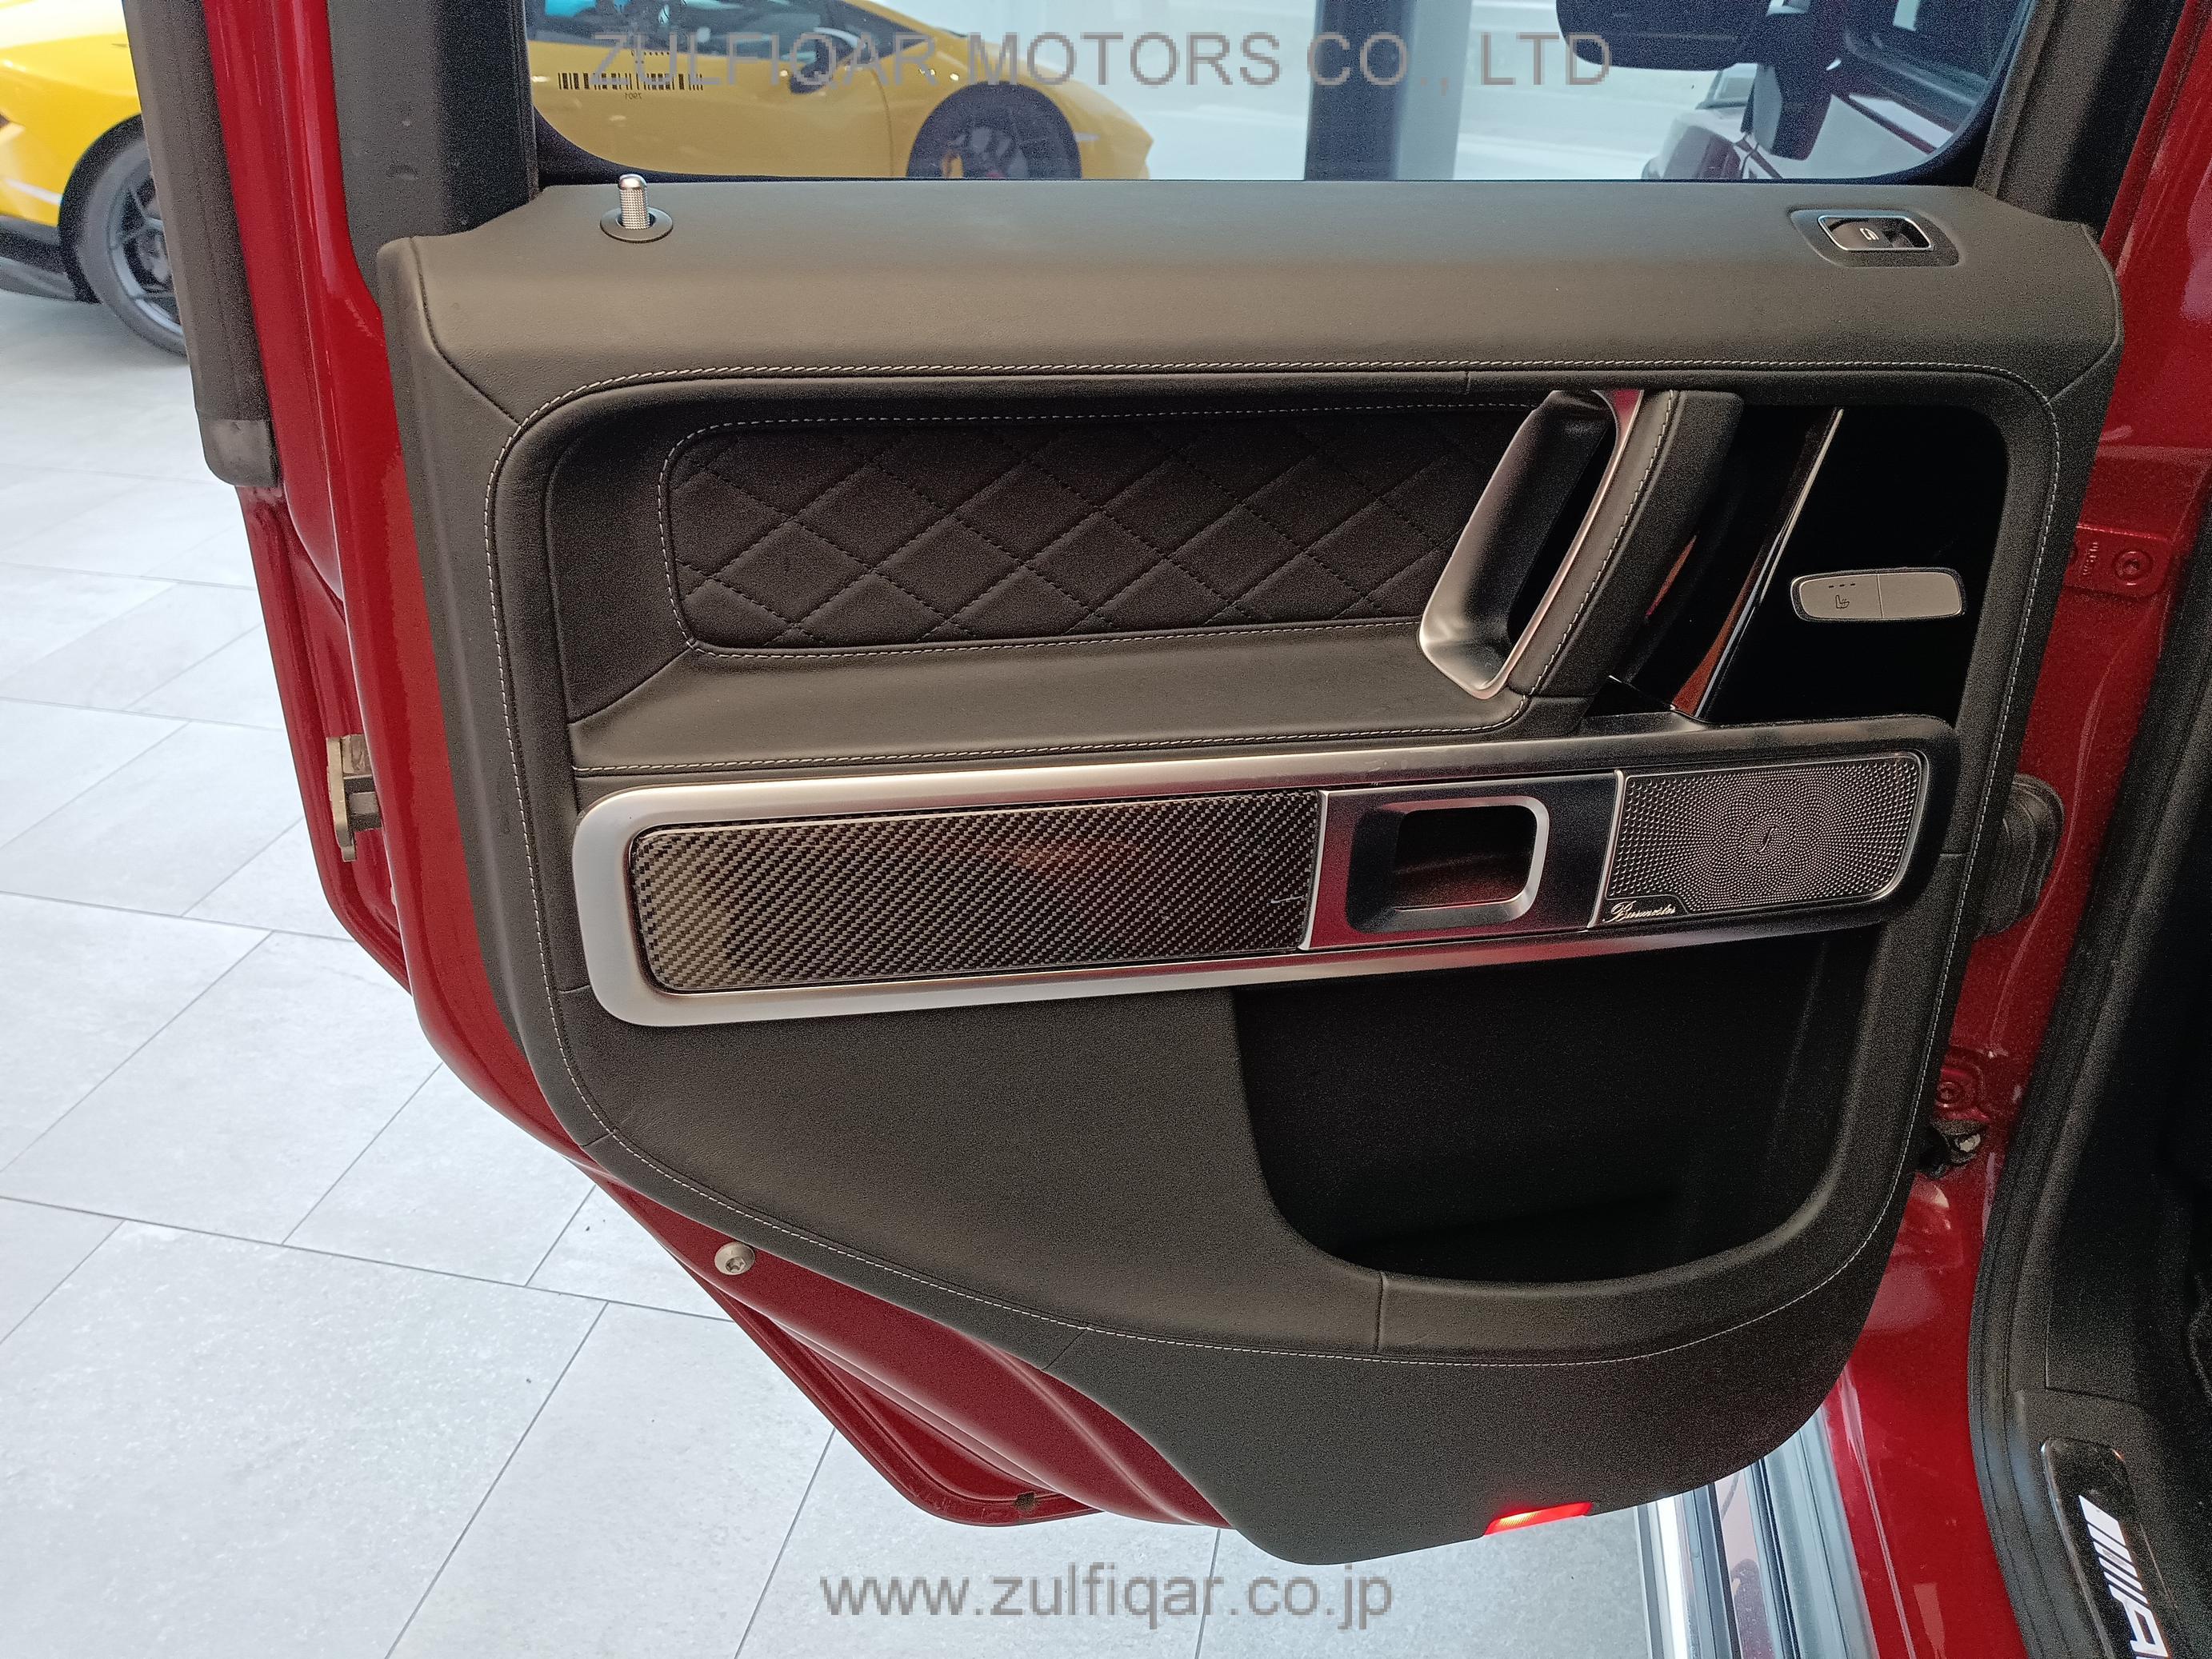 MERCEDES AMG G CLASS 2019 Image 54